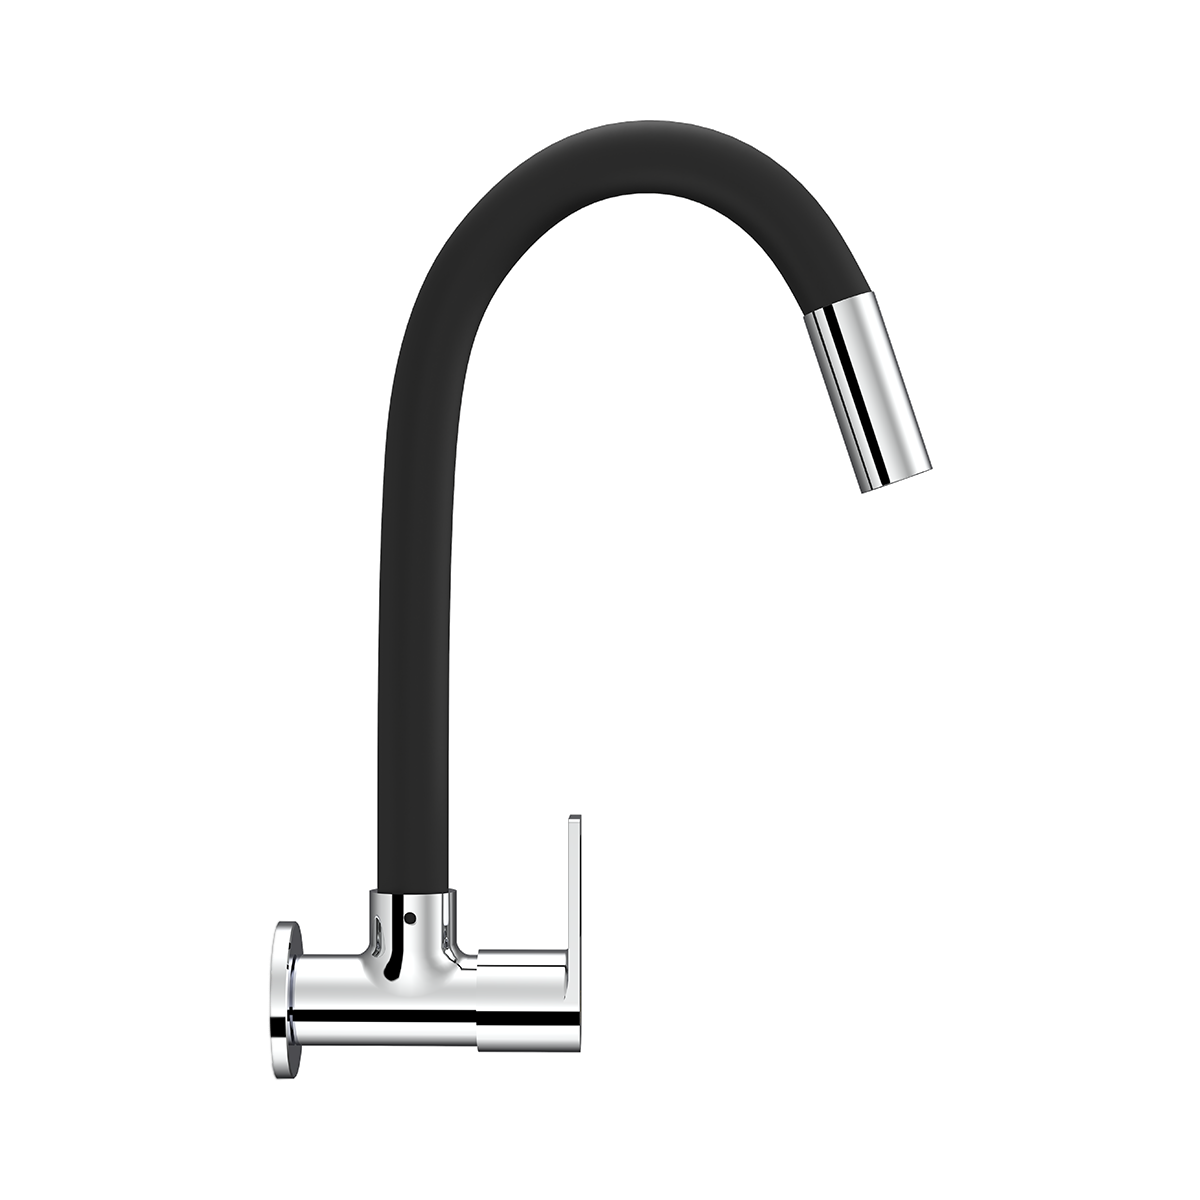 Wall Mounted Sink Cock With Swivel Flexible Spout & Flange